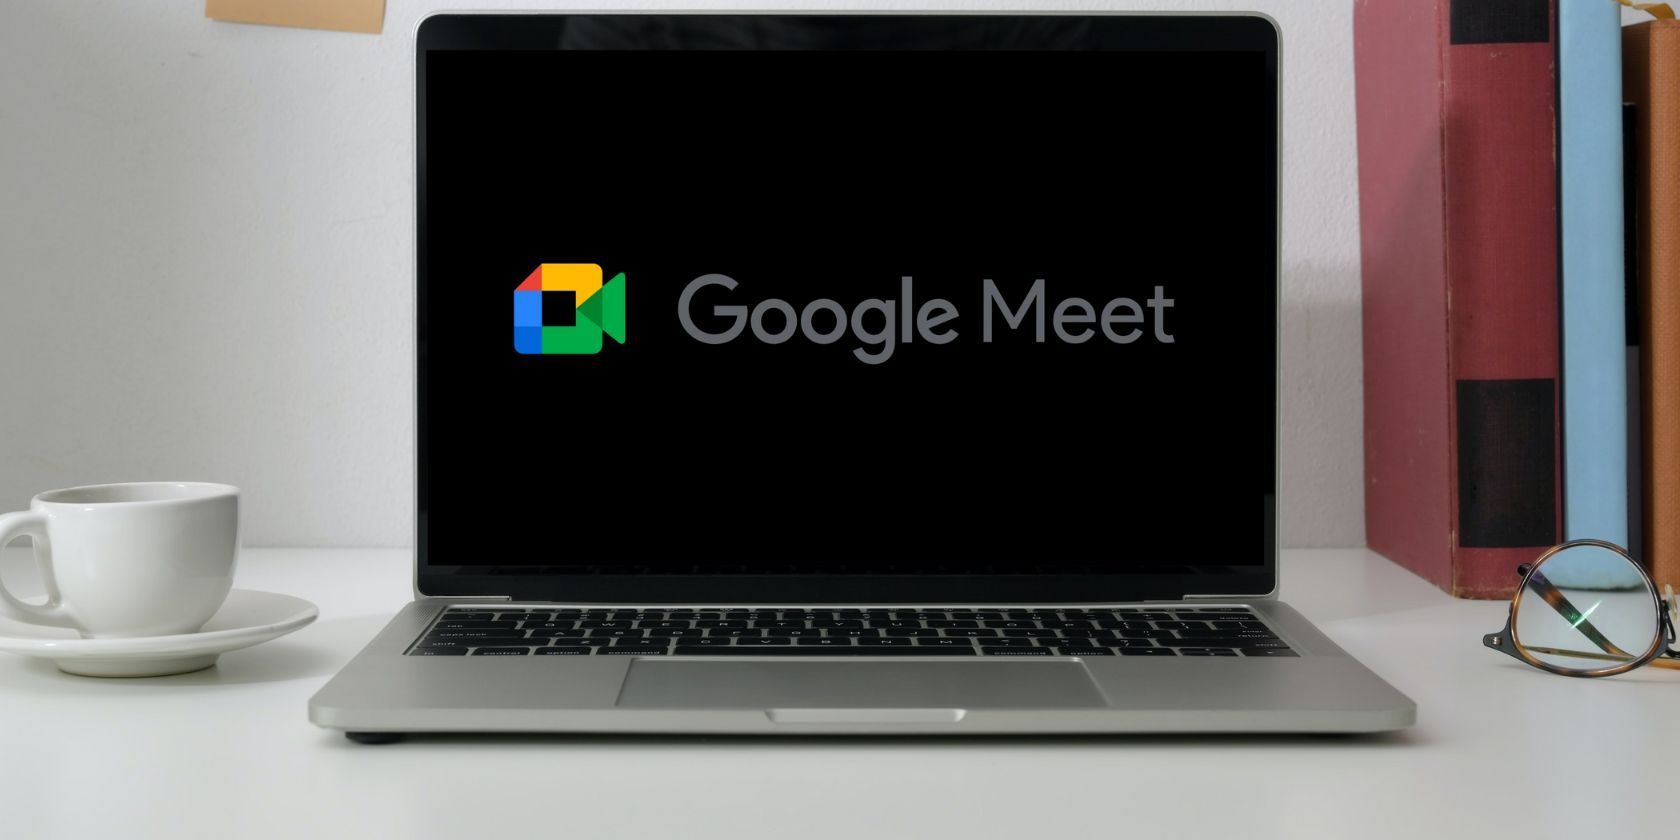 Google Workspace Updates: Use companion mode to check-in to a Google Meet  conference room, so everyone can know you by name